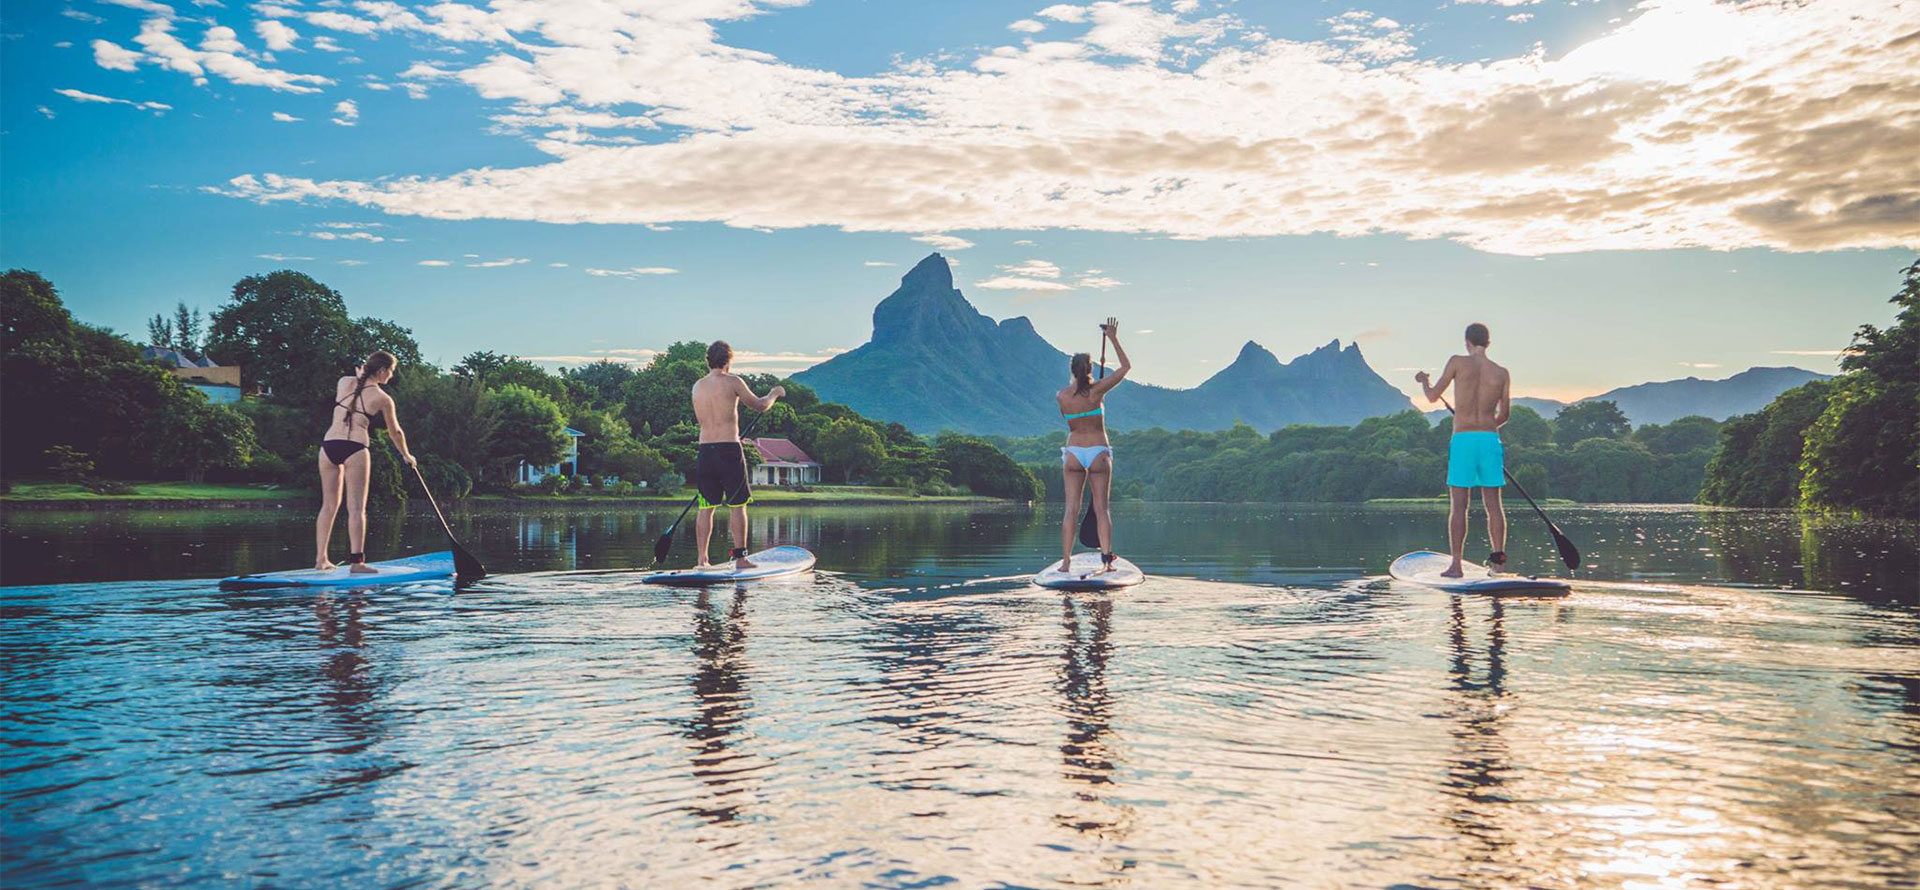 Swimming on paddle boards in Mauritius.